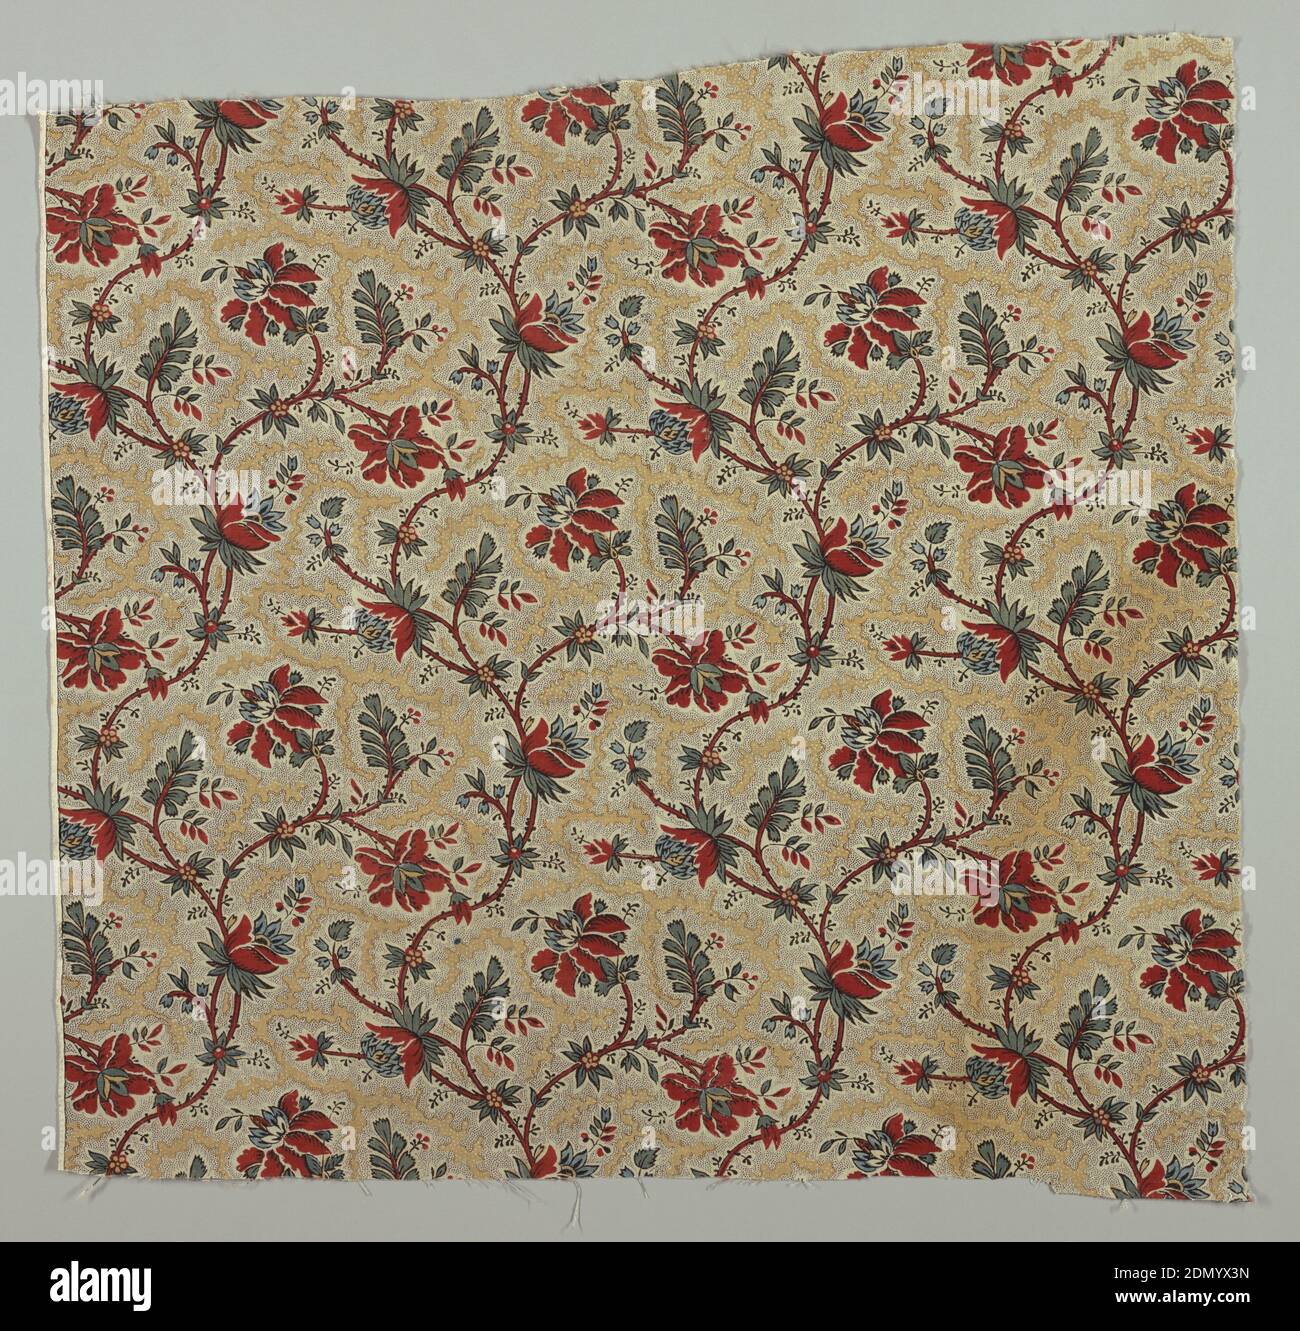 Textile, Medium: linen warp, cotton weft Technique: block printed on plain weave, Curving stem with flowers and leaves on a picottage and vermicular background. Black, mustard, red, and blue., France, 1775–85, printed, dyed & painted textiles, Textile Stock Photo